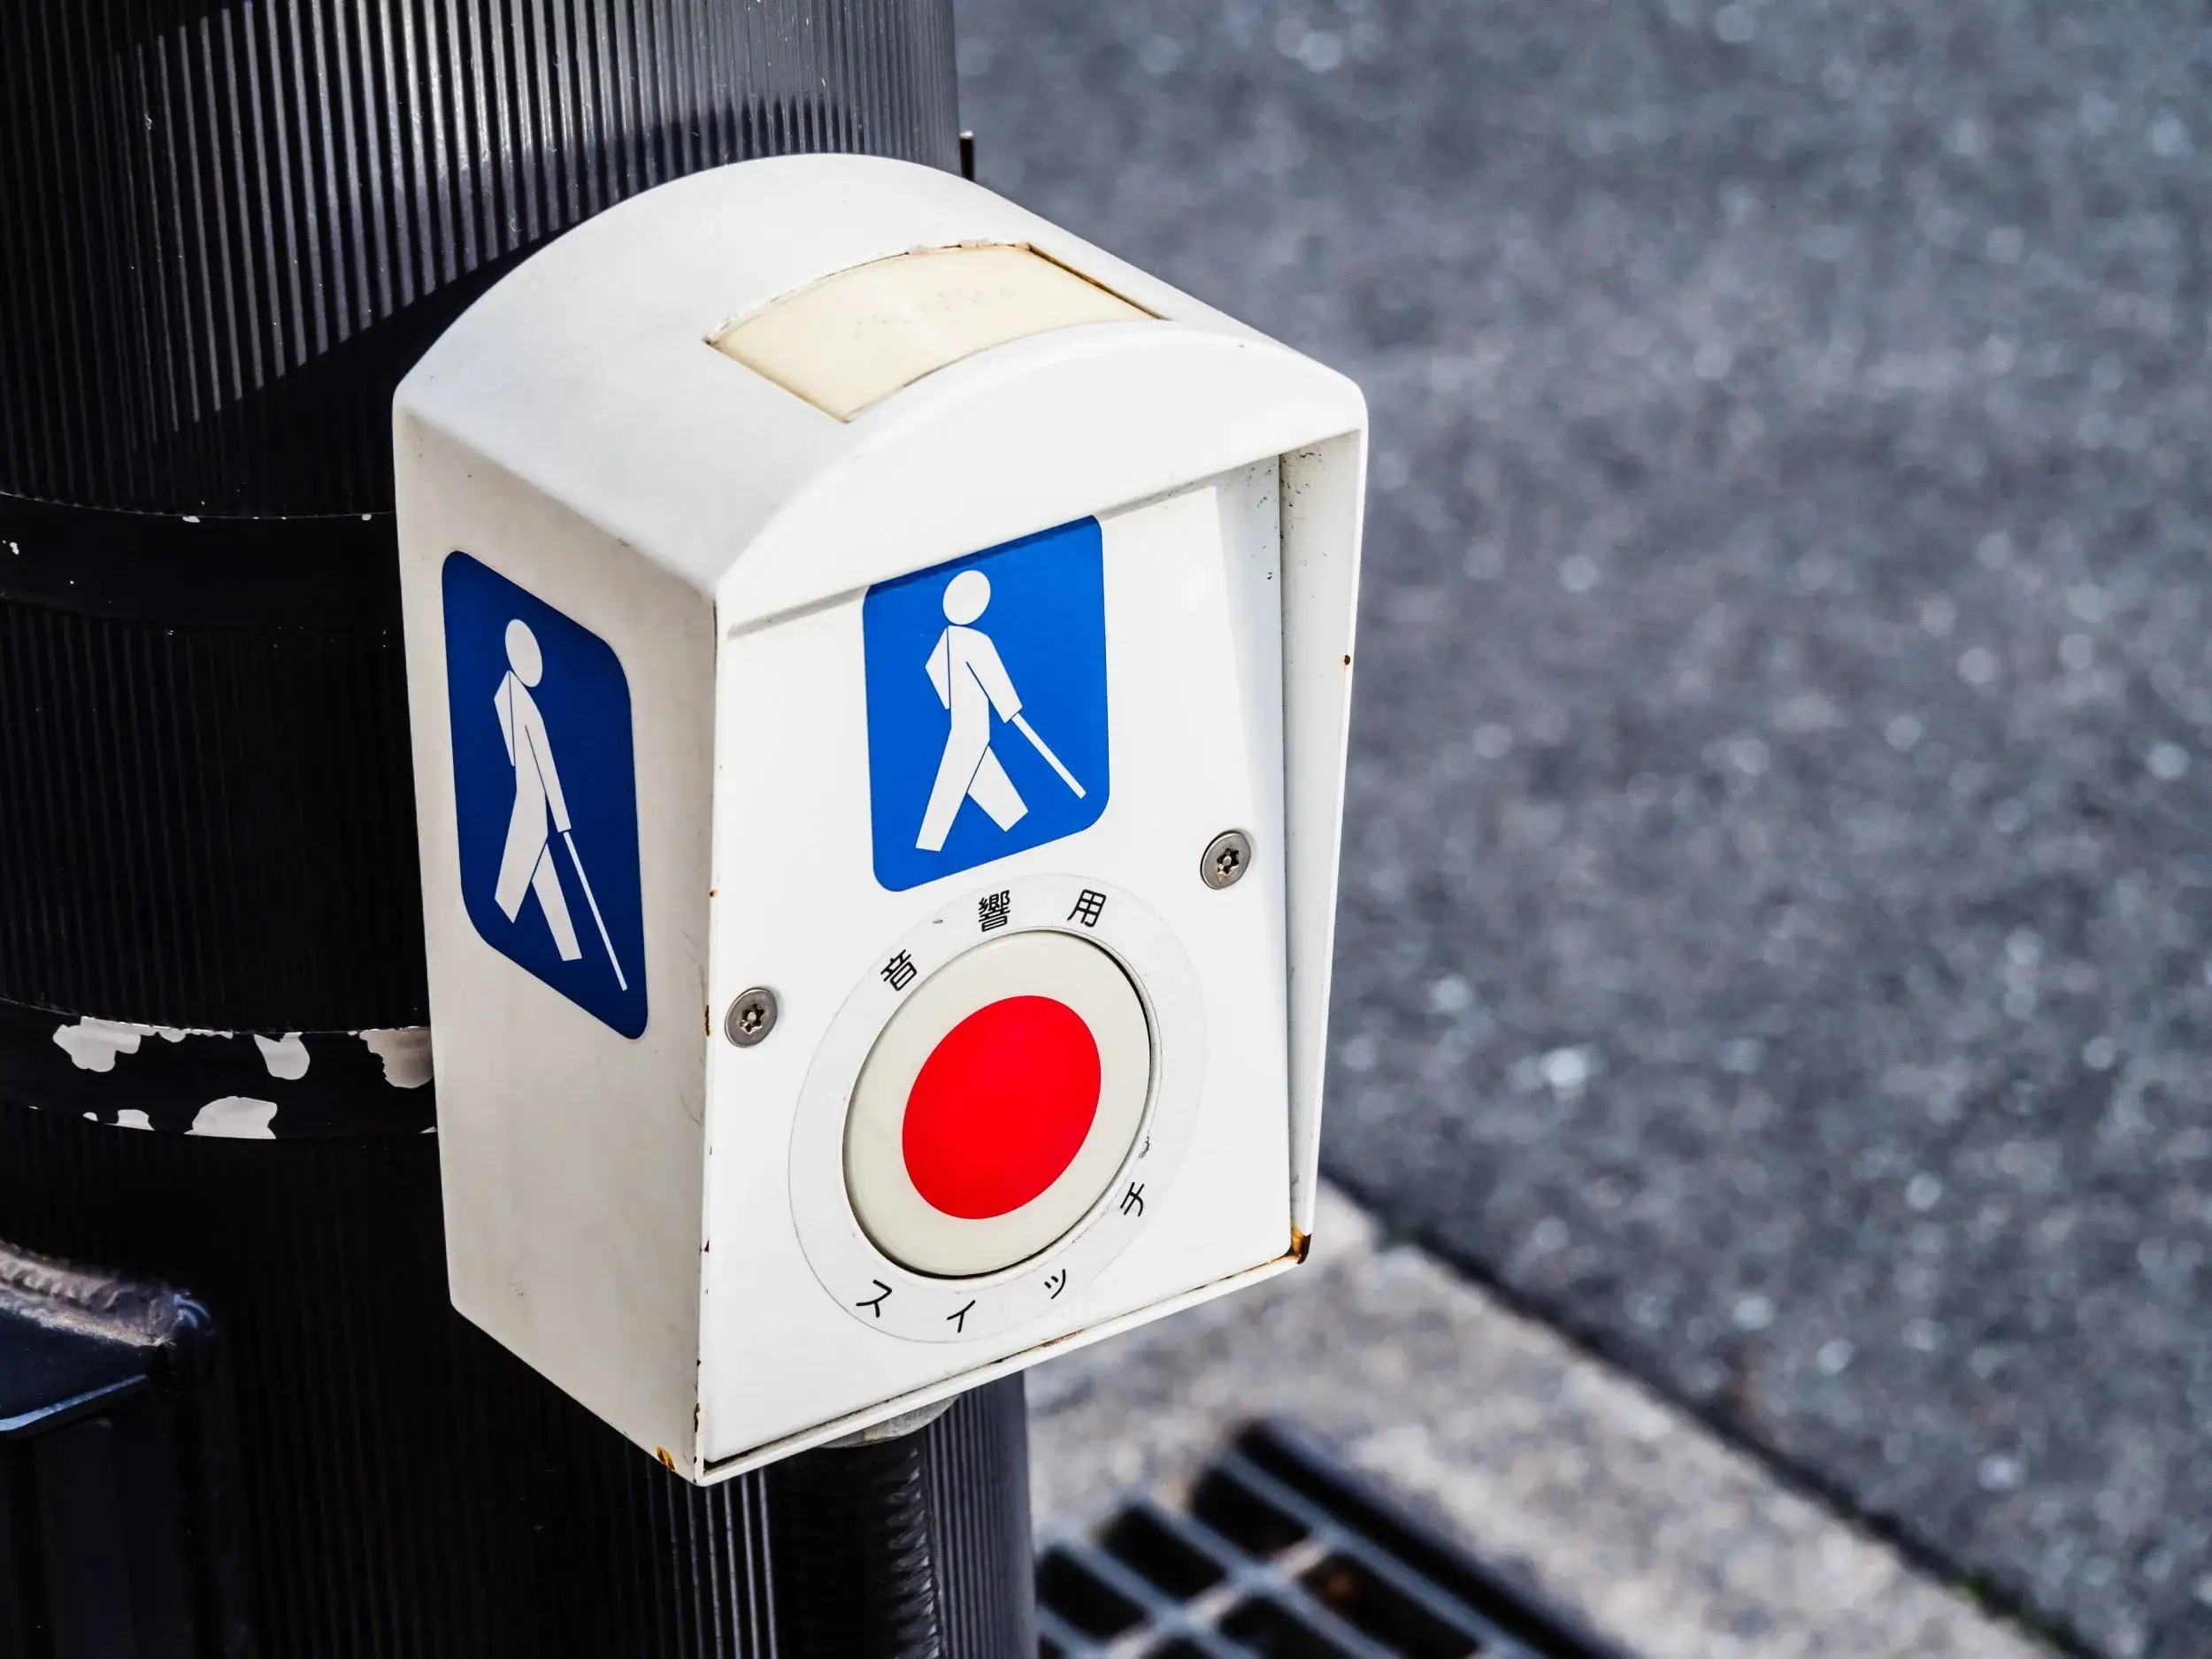 A red and white pedestrian crossing sign on a pole.